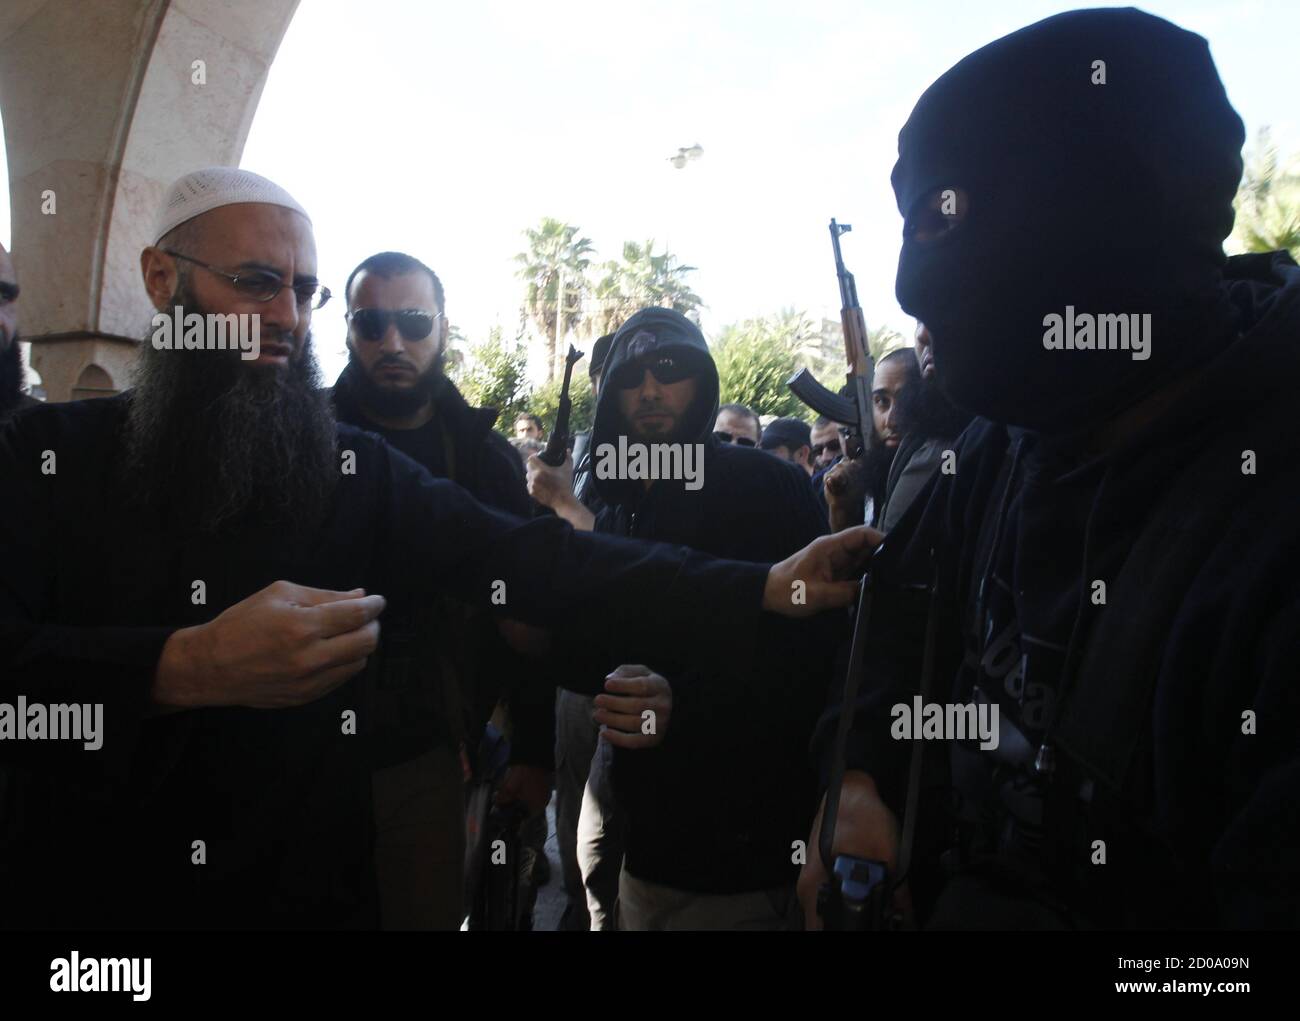 Lebanon's Sunni Muslim Salafist leader Ahmad al-Assir (L) asks a supporter  to remove his mask during the funeral of two of his supporters, who died  during Sunday's fighting with supporters of Lebanon's